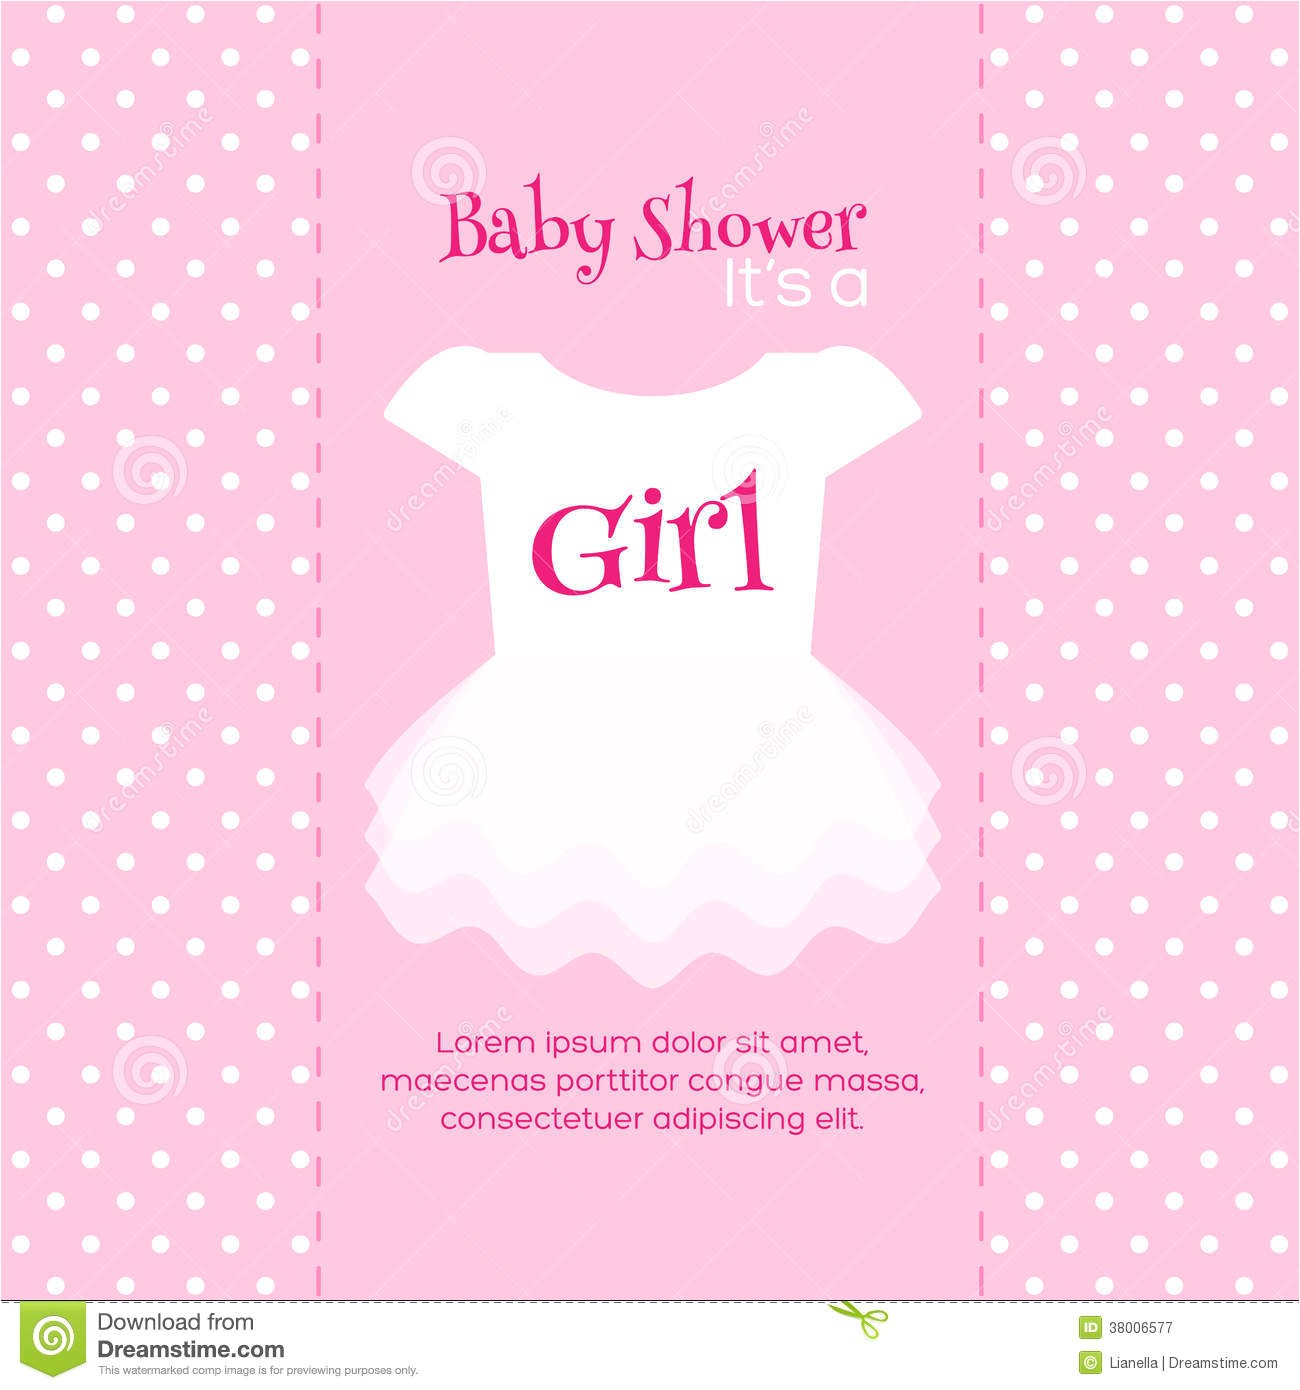 Baby Shower Invites Free Downloads Template Baby Shower Invitation Template Free Download